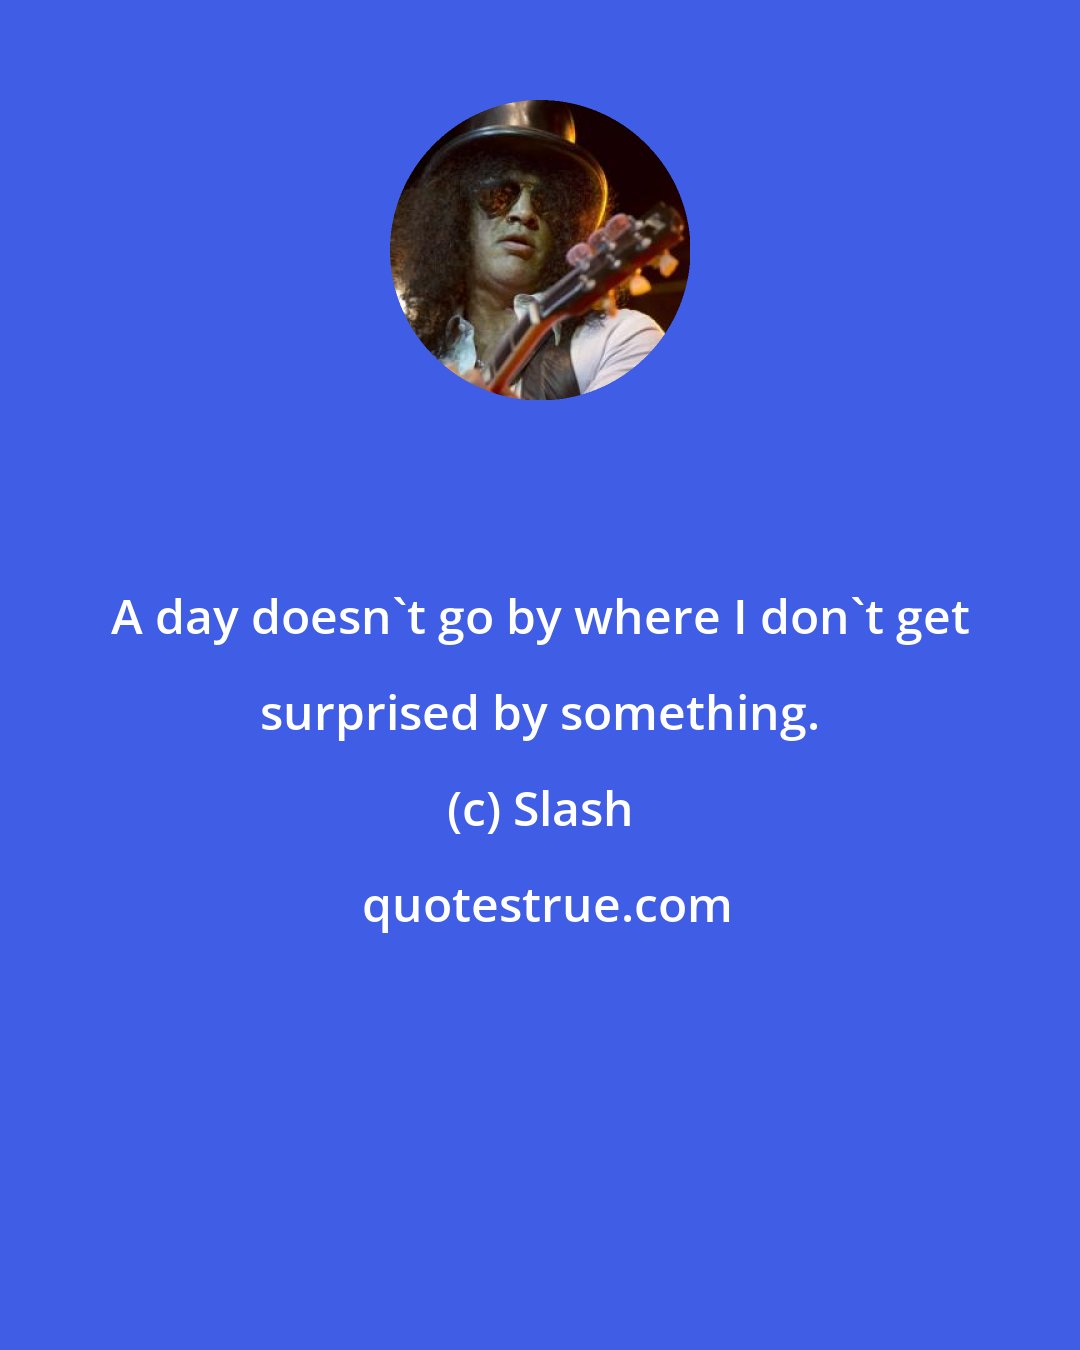 Slash: A day doesn't go by where I don't get surprised by something.